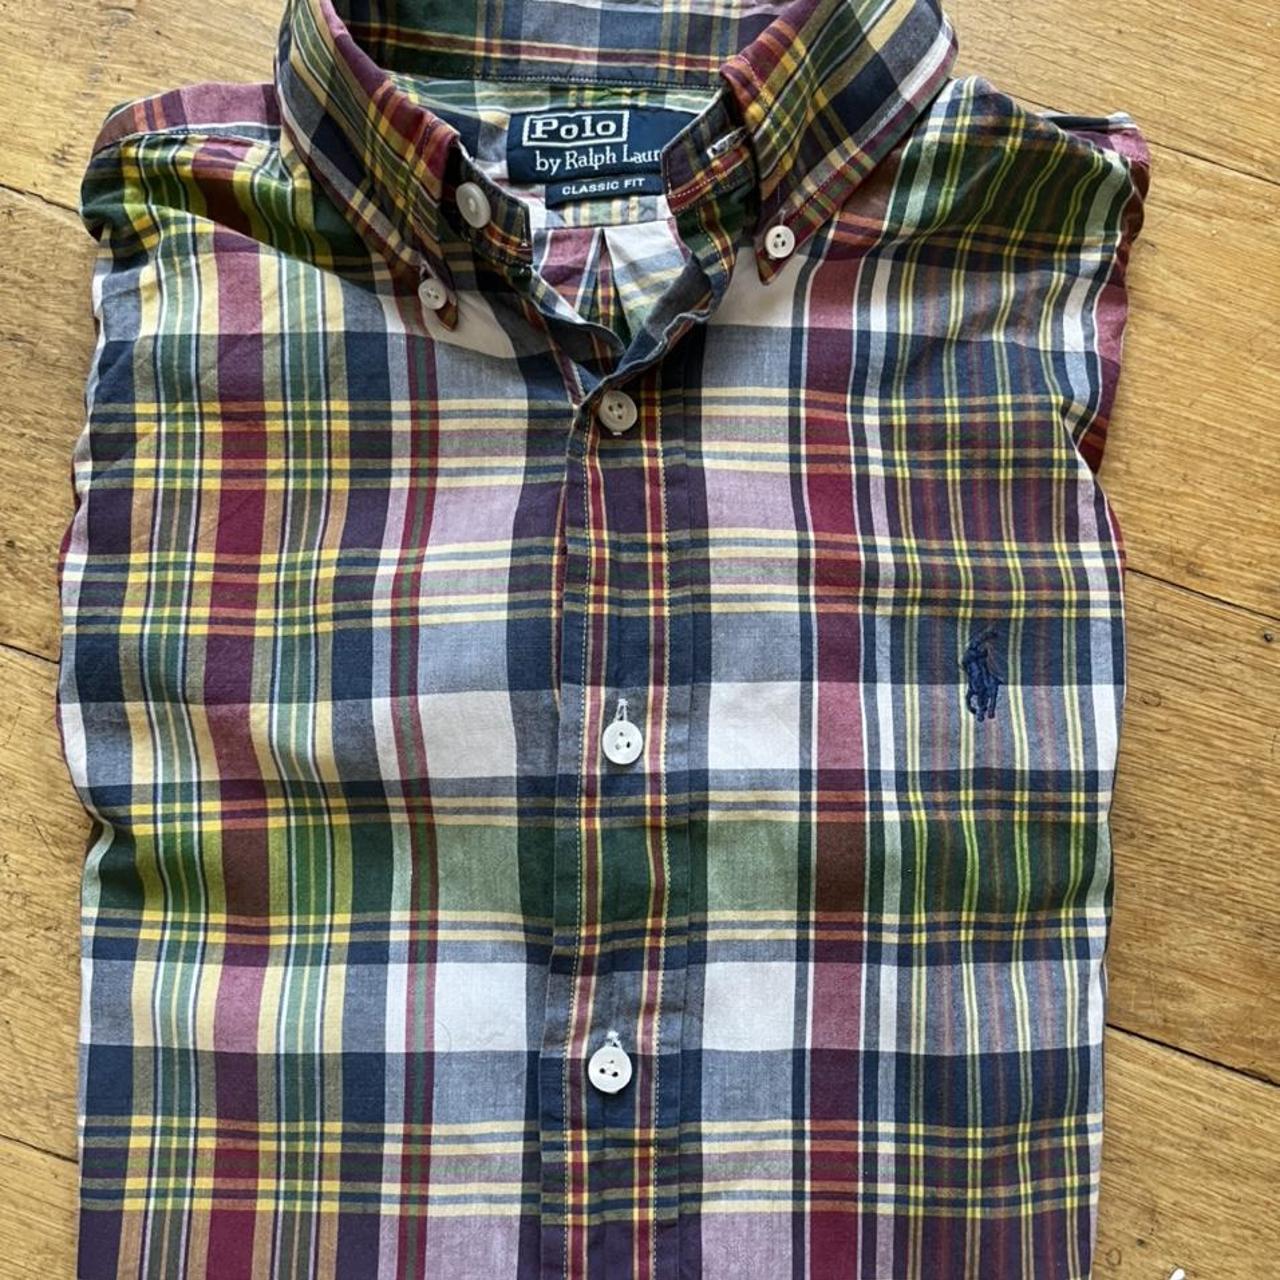 Polo by Ralph Lauren madras shirt in size S. ... - Depop